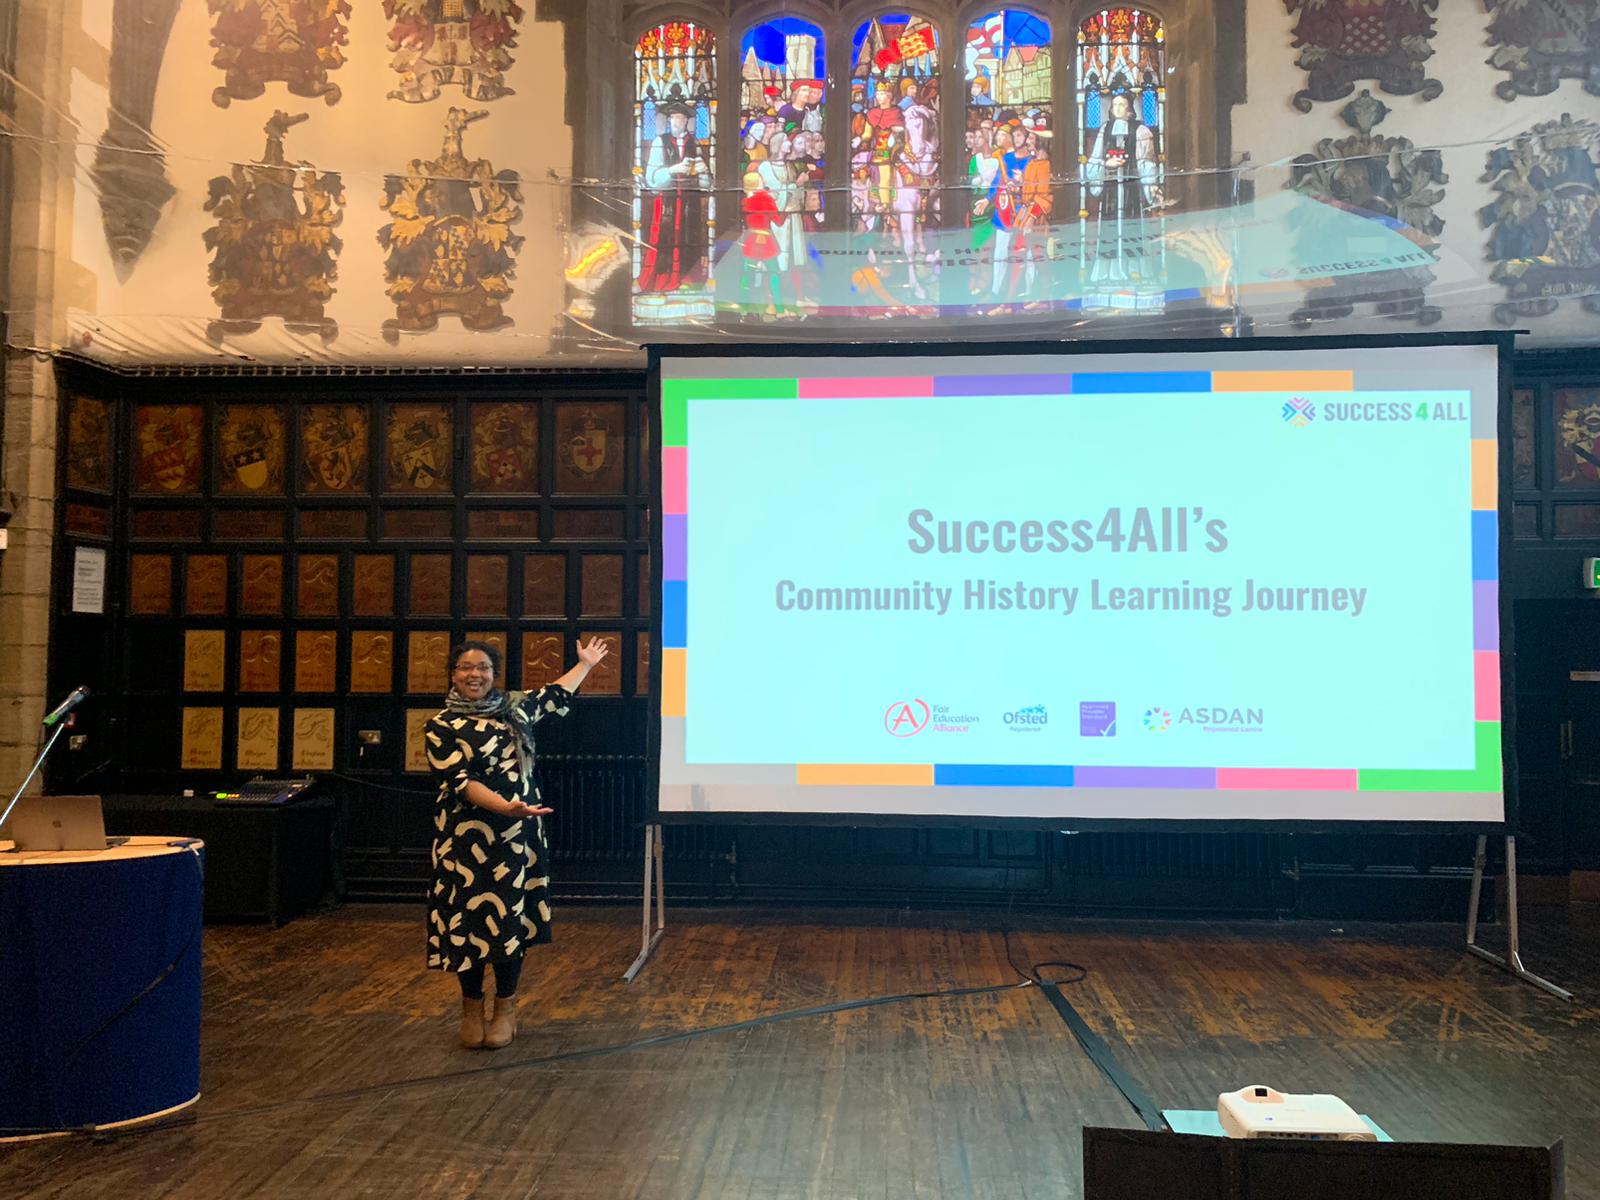 Success4All's Community History Learning Journey